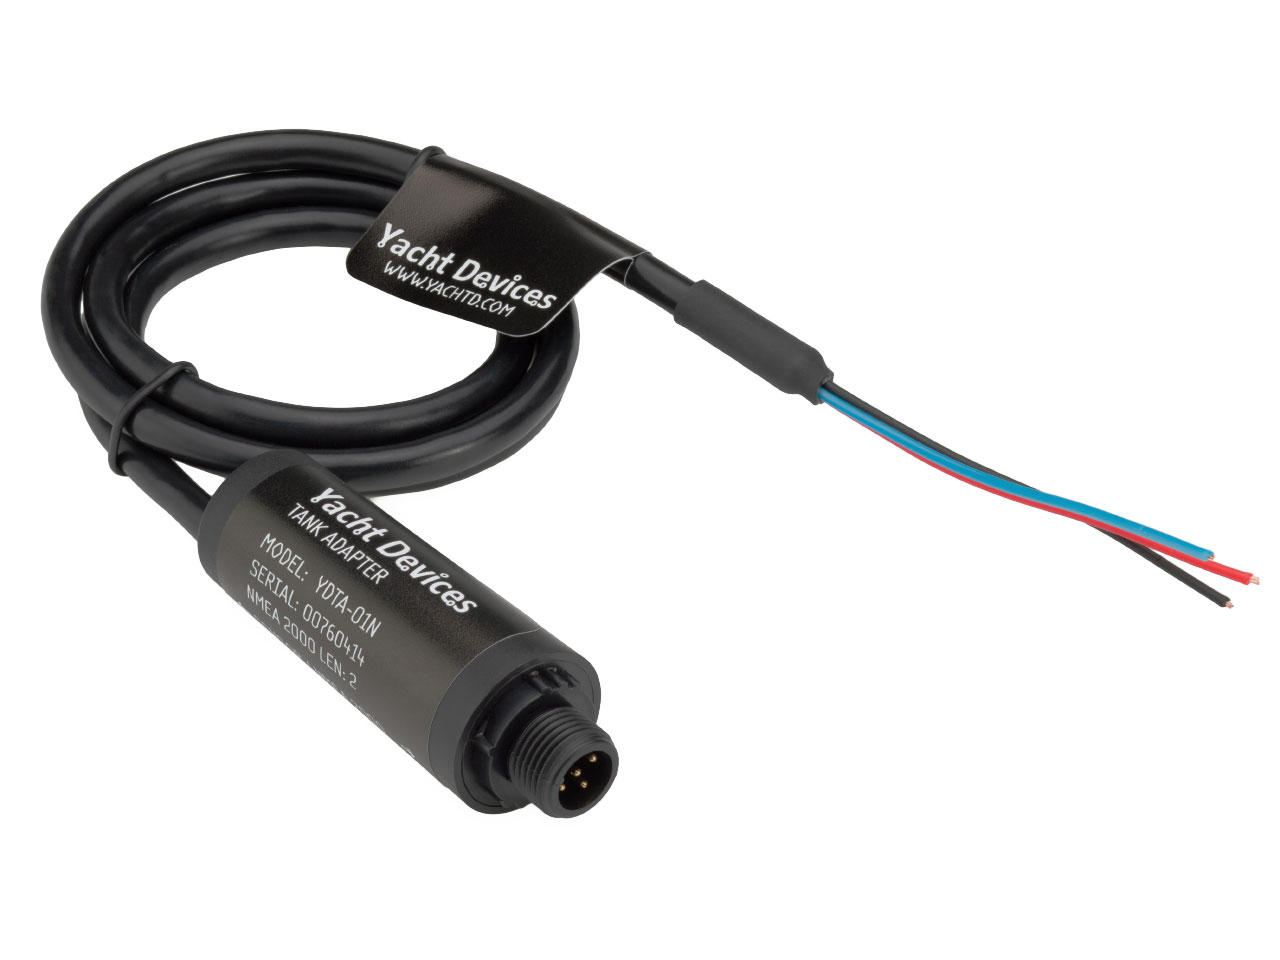 YDTA-01N model, with NMEA 2000 Micro Male connector